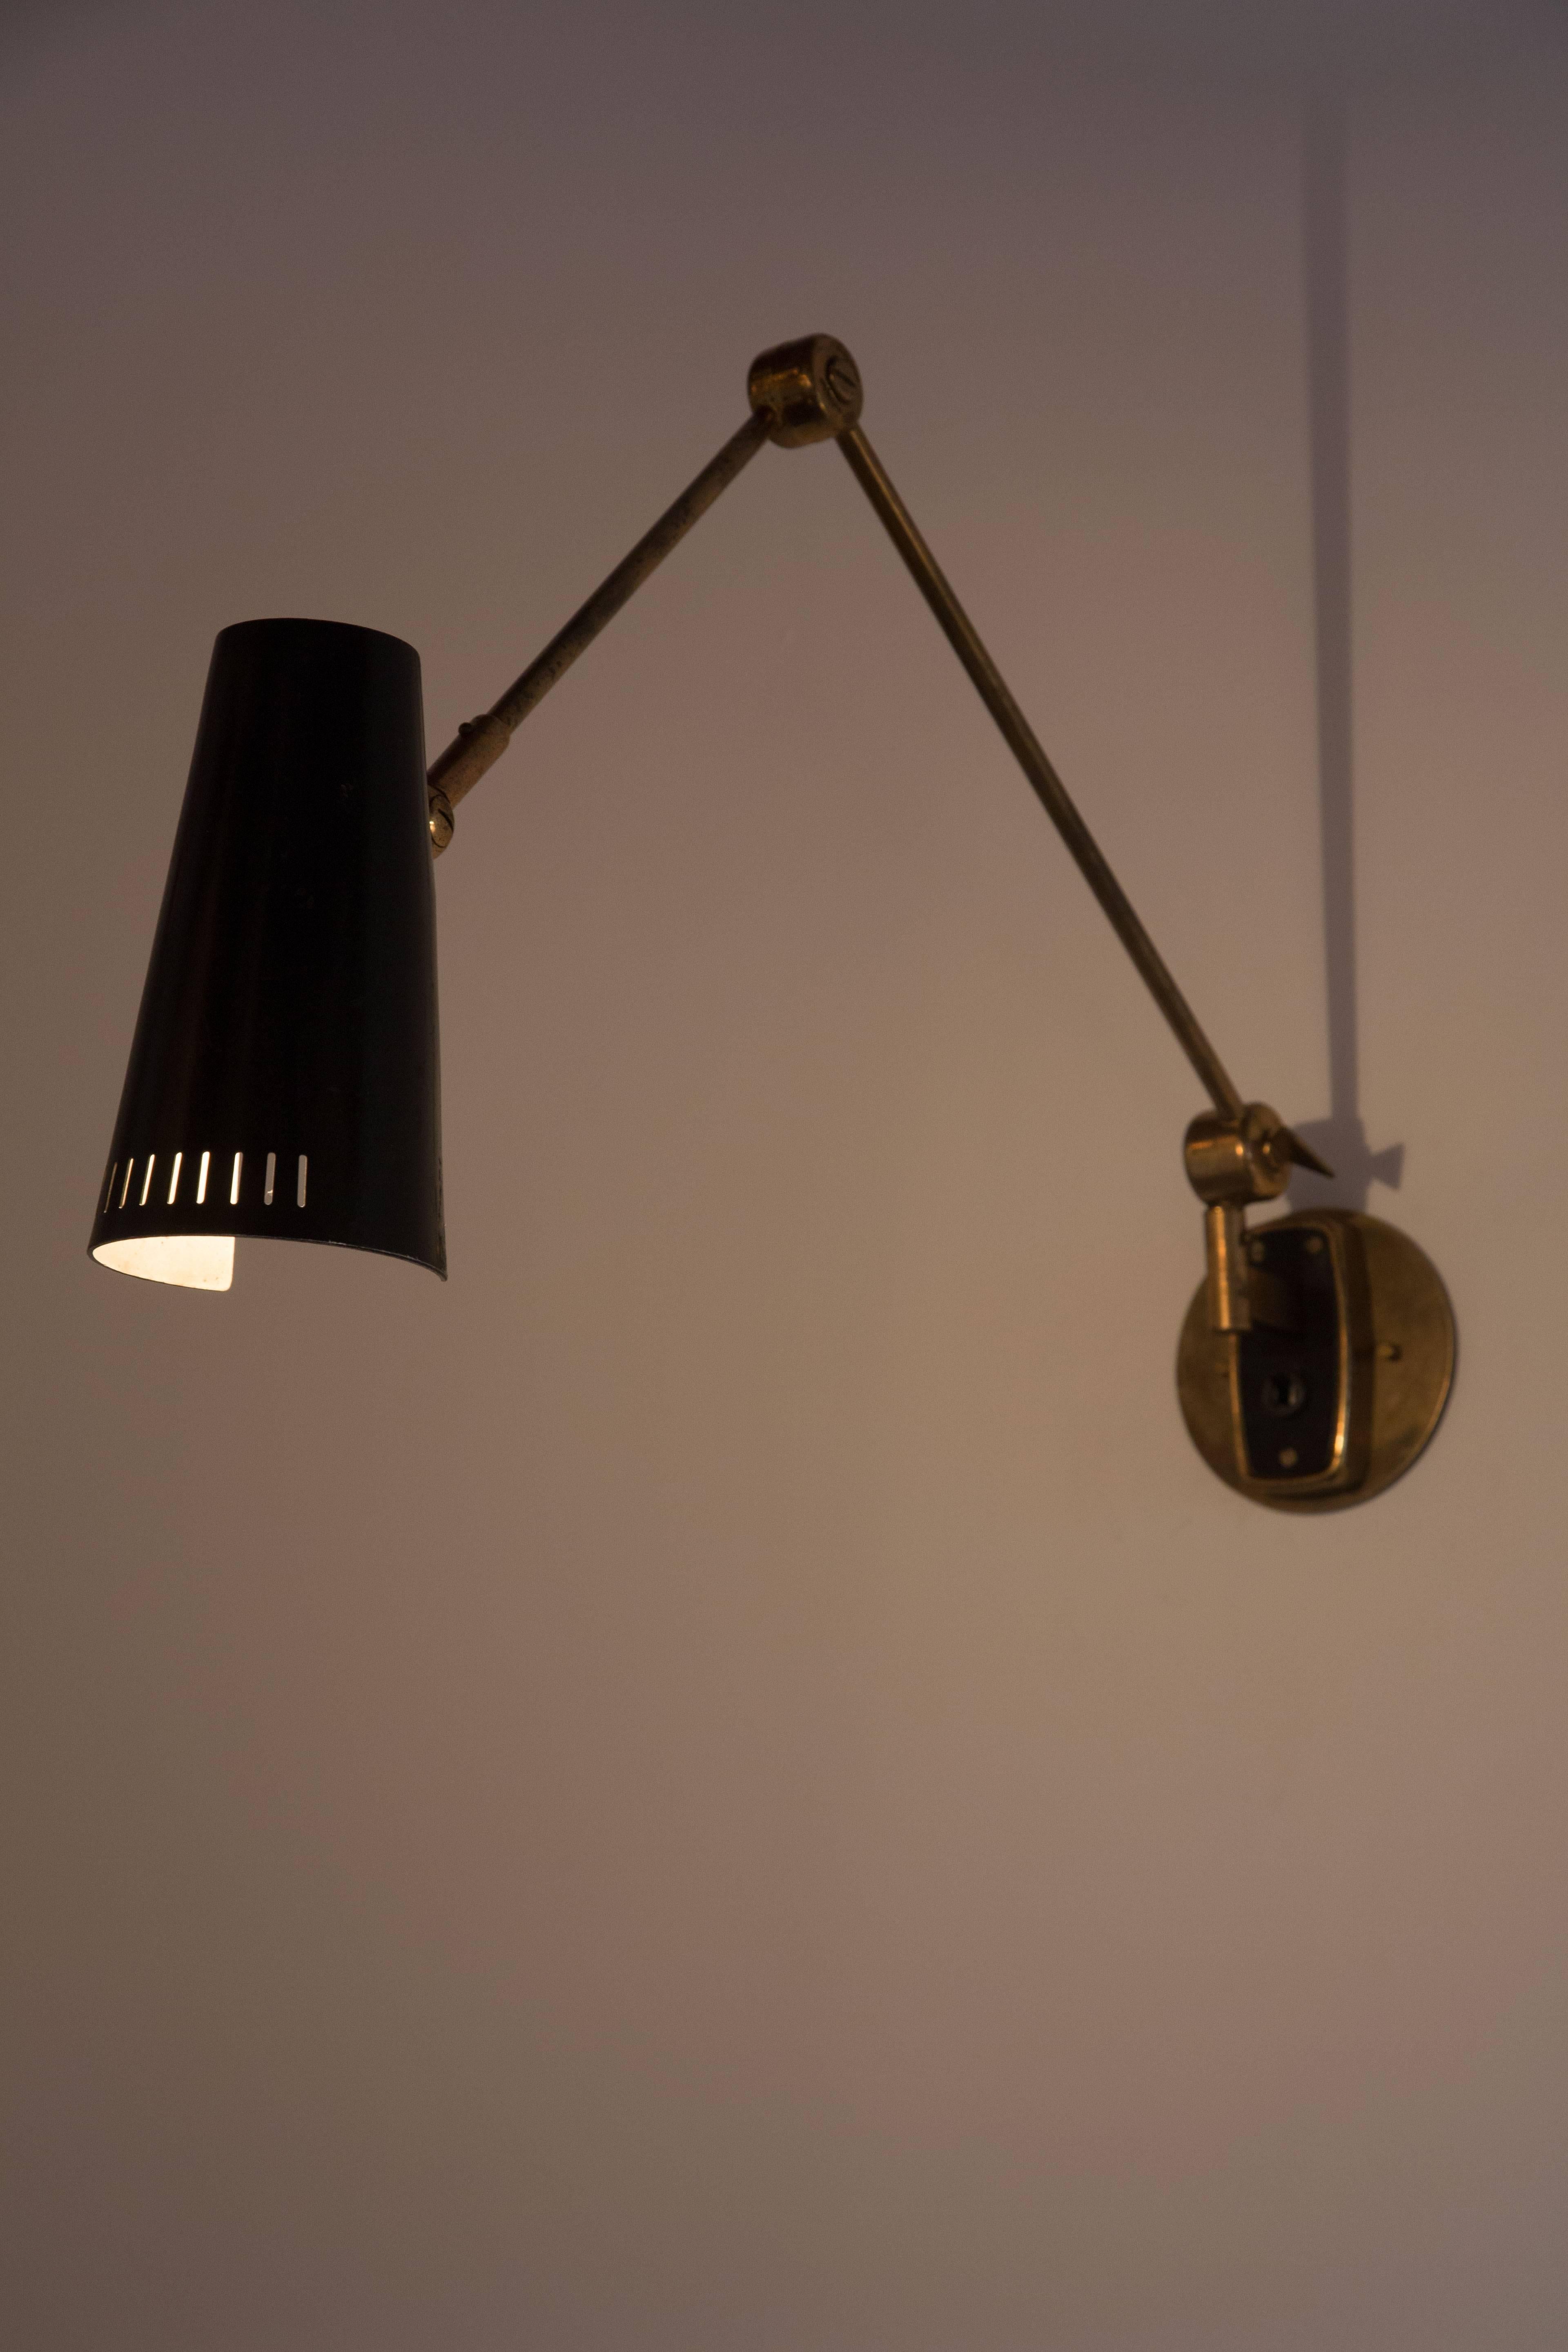 Brass wall light, painted metal shade with vertical perforations at the base. Arm of light articulates up/down by adjusting the key. Shade articulates up/down by adjusting the joint at base of shade. Arm pivots left to right. Original on/off switch